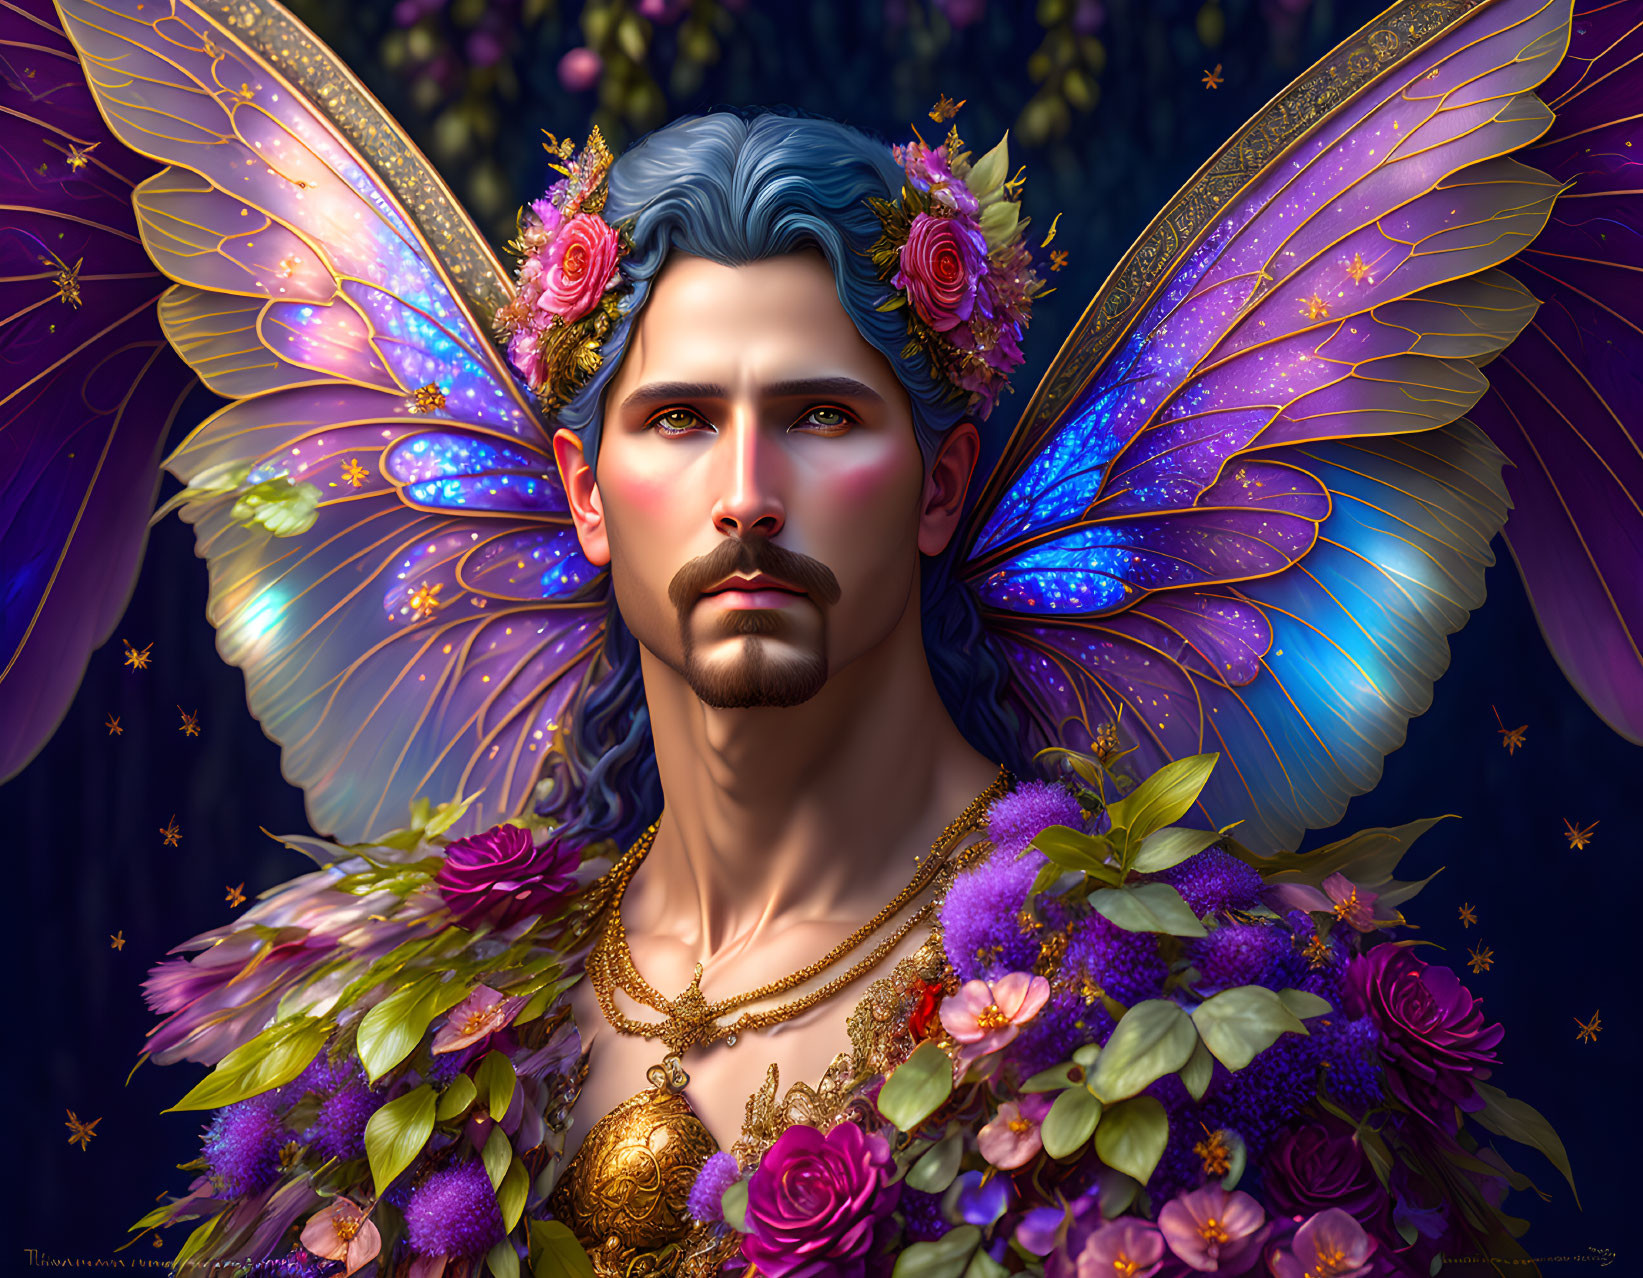 Fantastical male figure with blue hair and butterfly wings in digital art